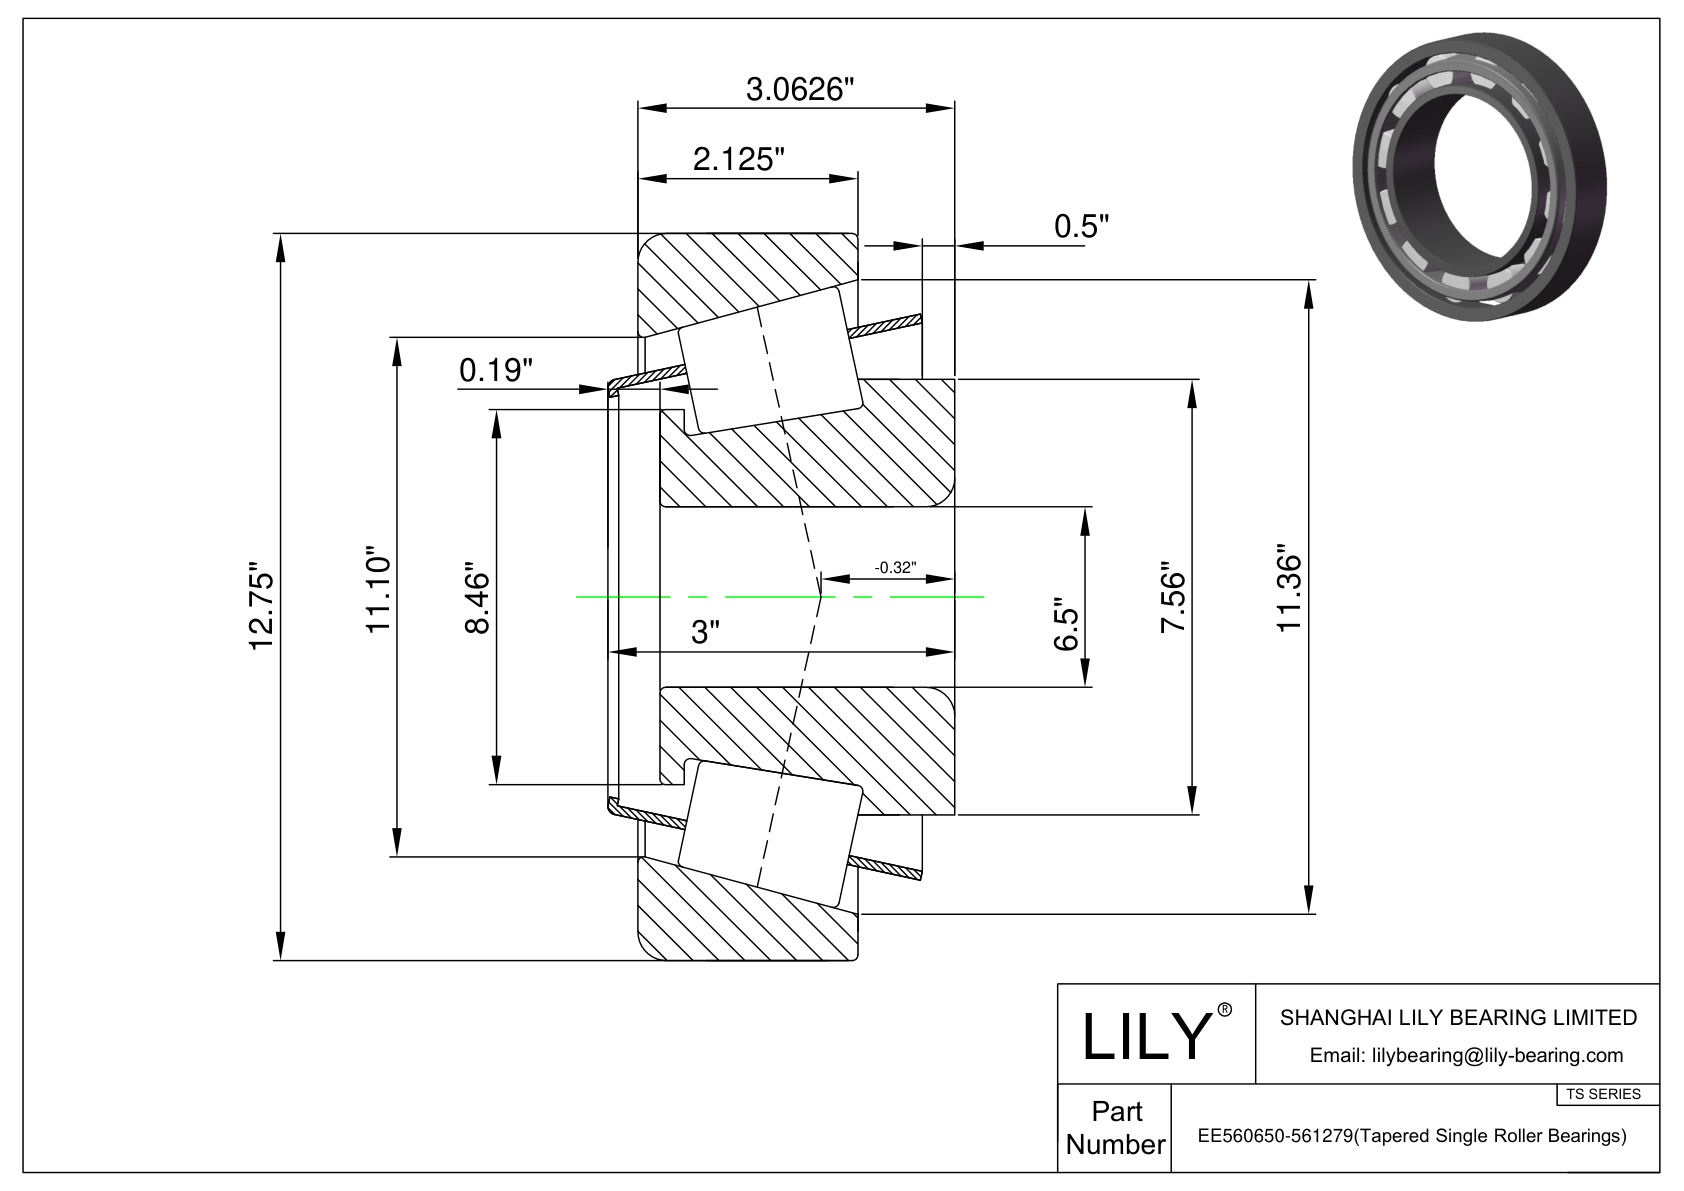 EE560650-561279 TS (Tapered Single Roller Bearings) (Imperial) cad drawing